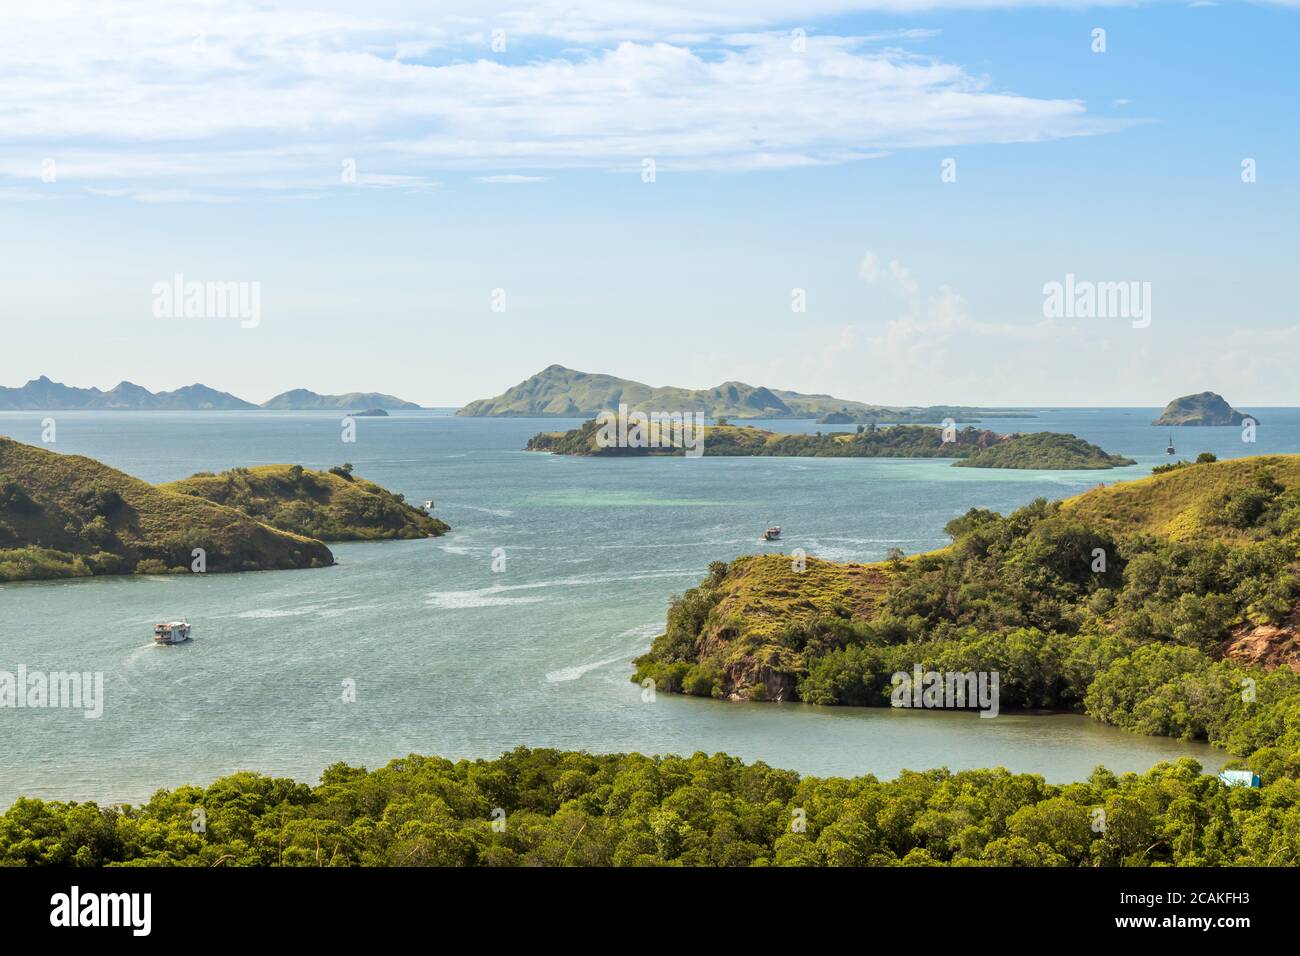 A landscape view over Komodo National Park from Rinca Island, Flores, Indonesia Stock Photo